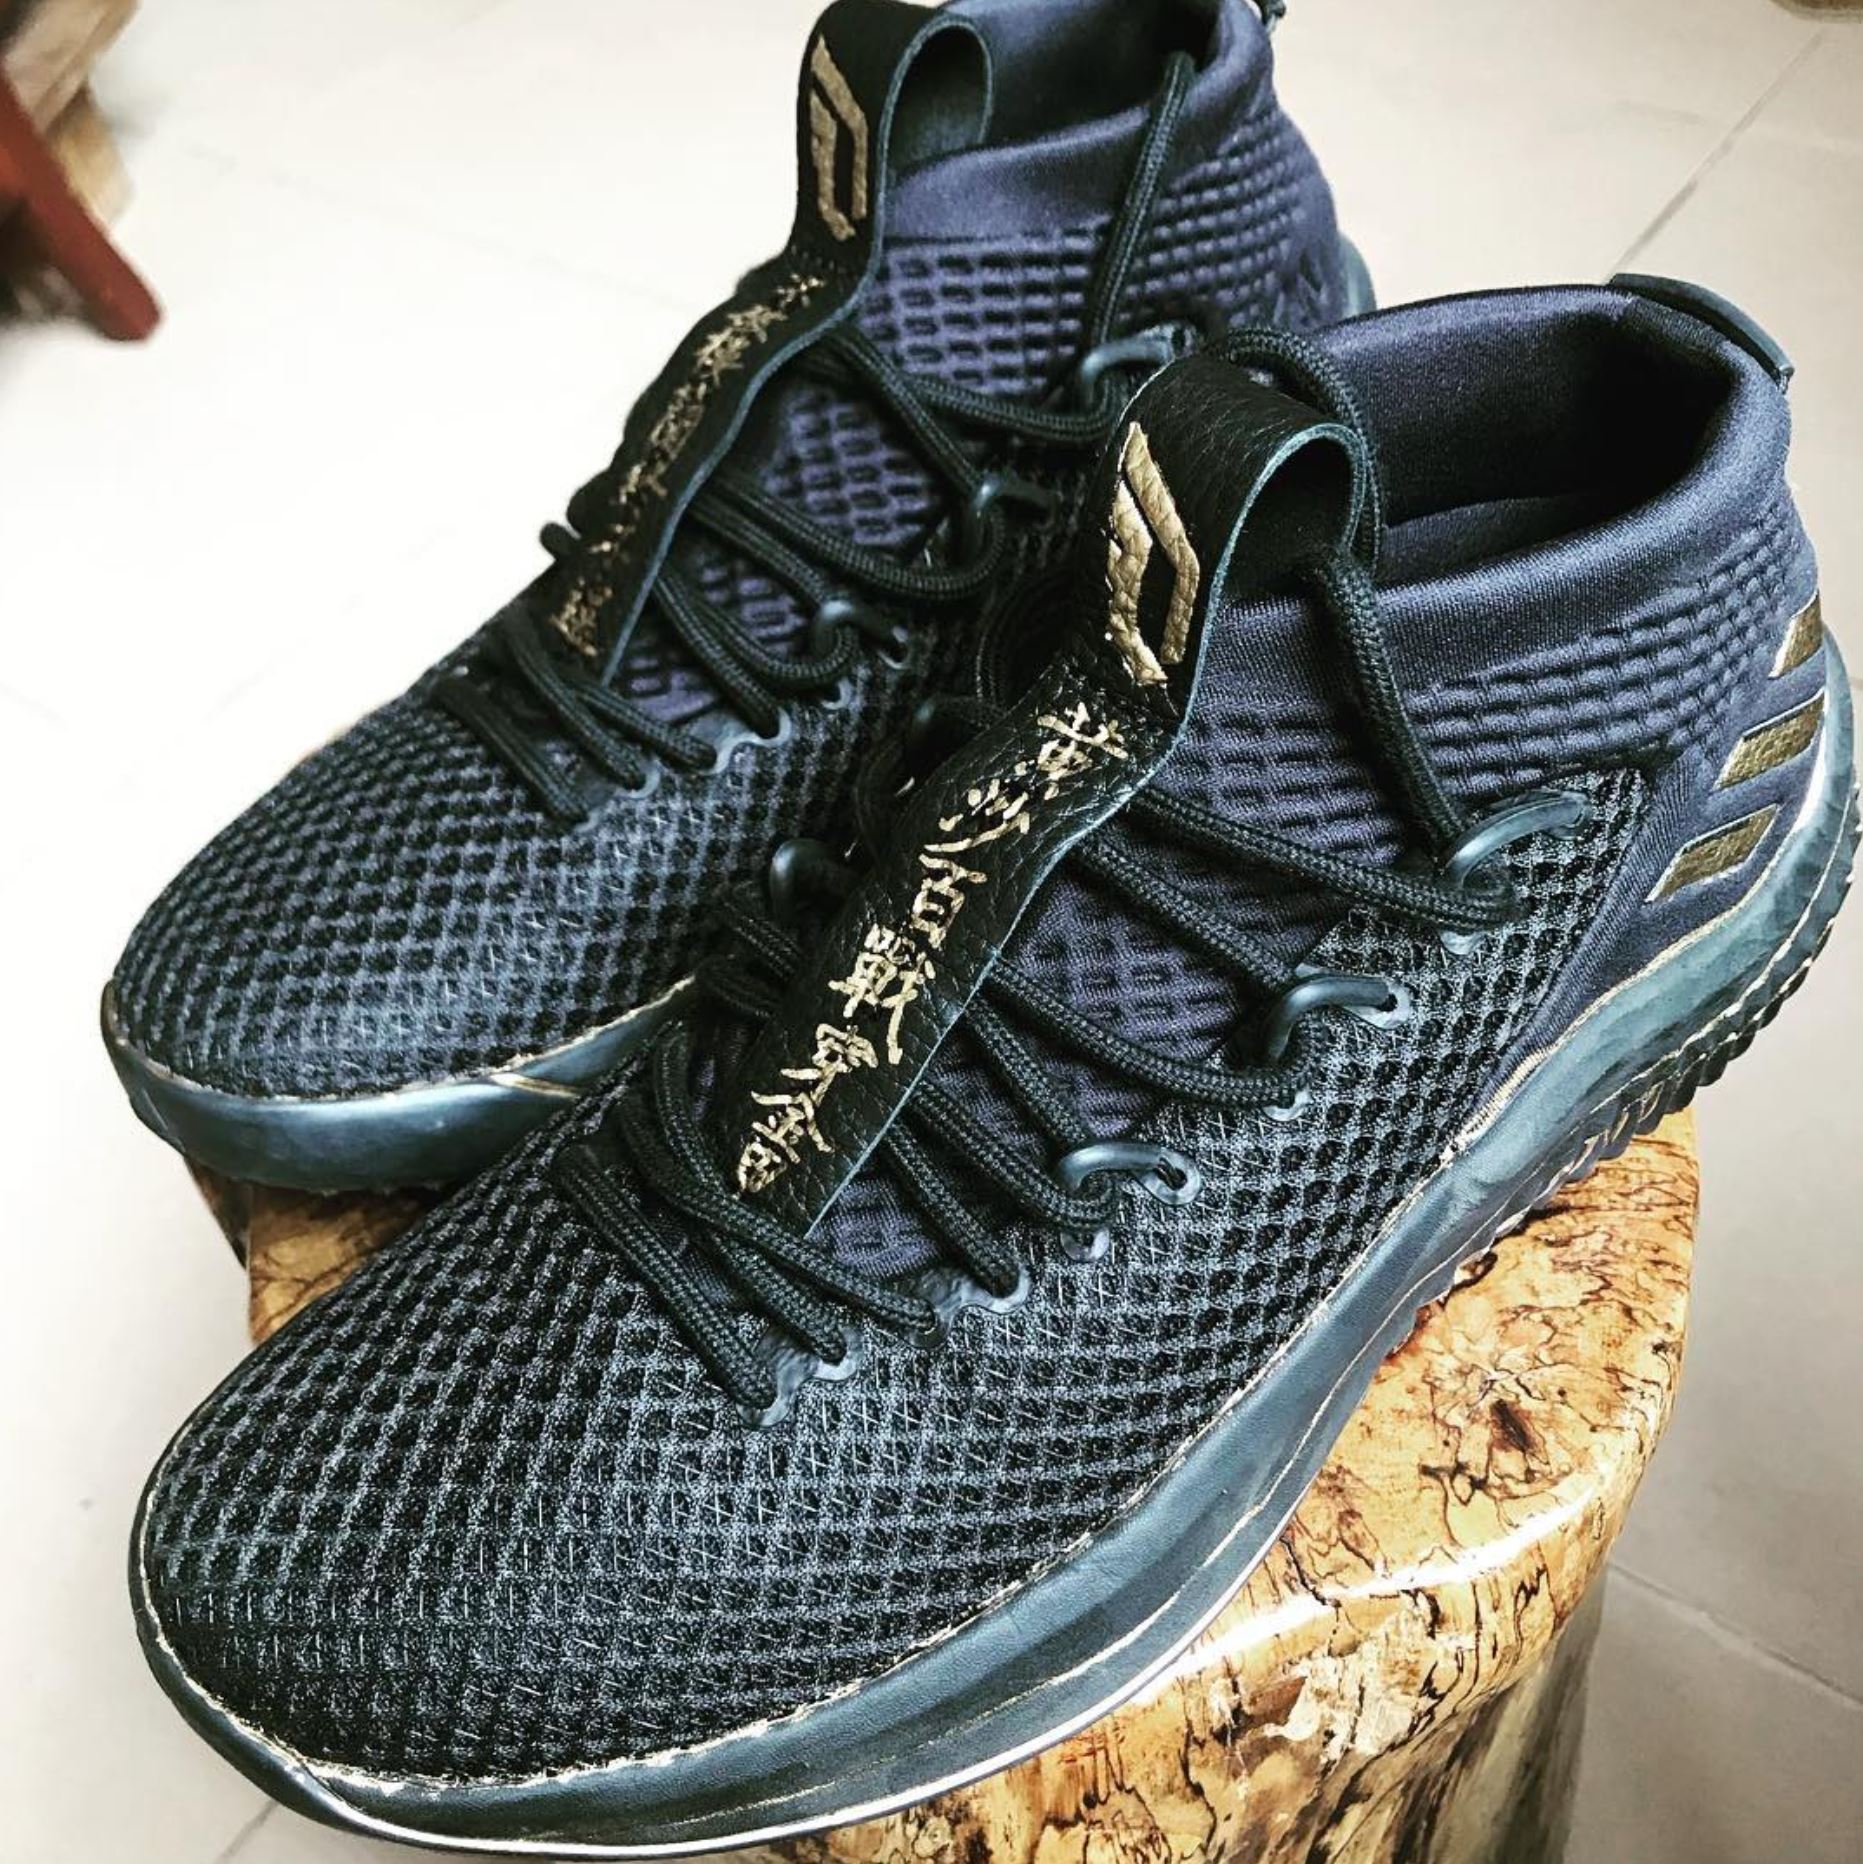 This adidas Dame 4 with Gold Chinese 